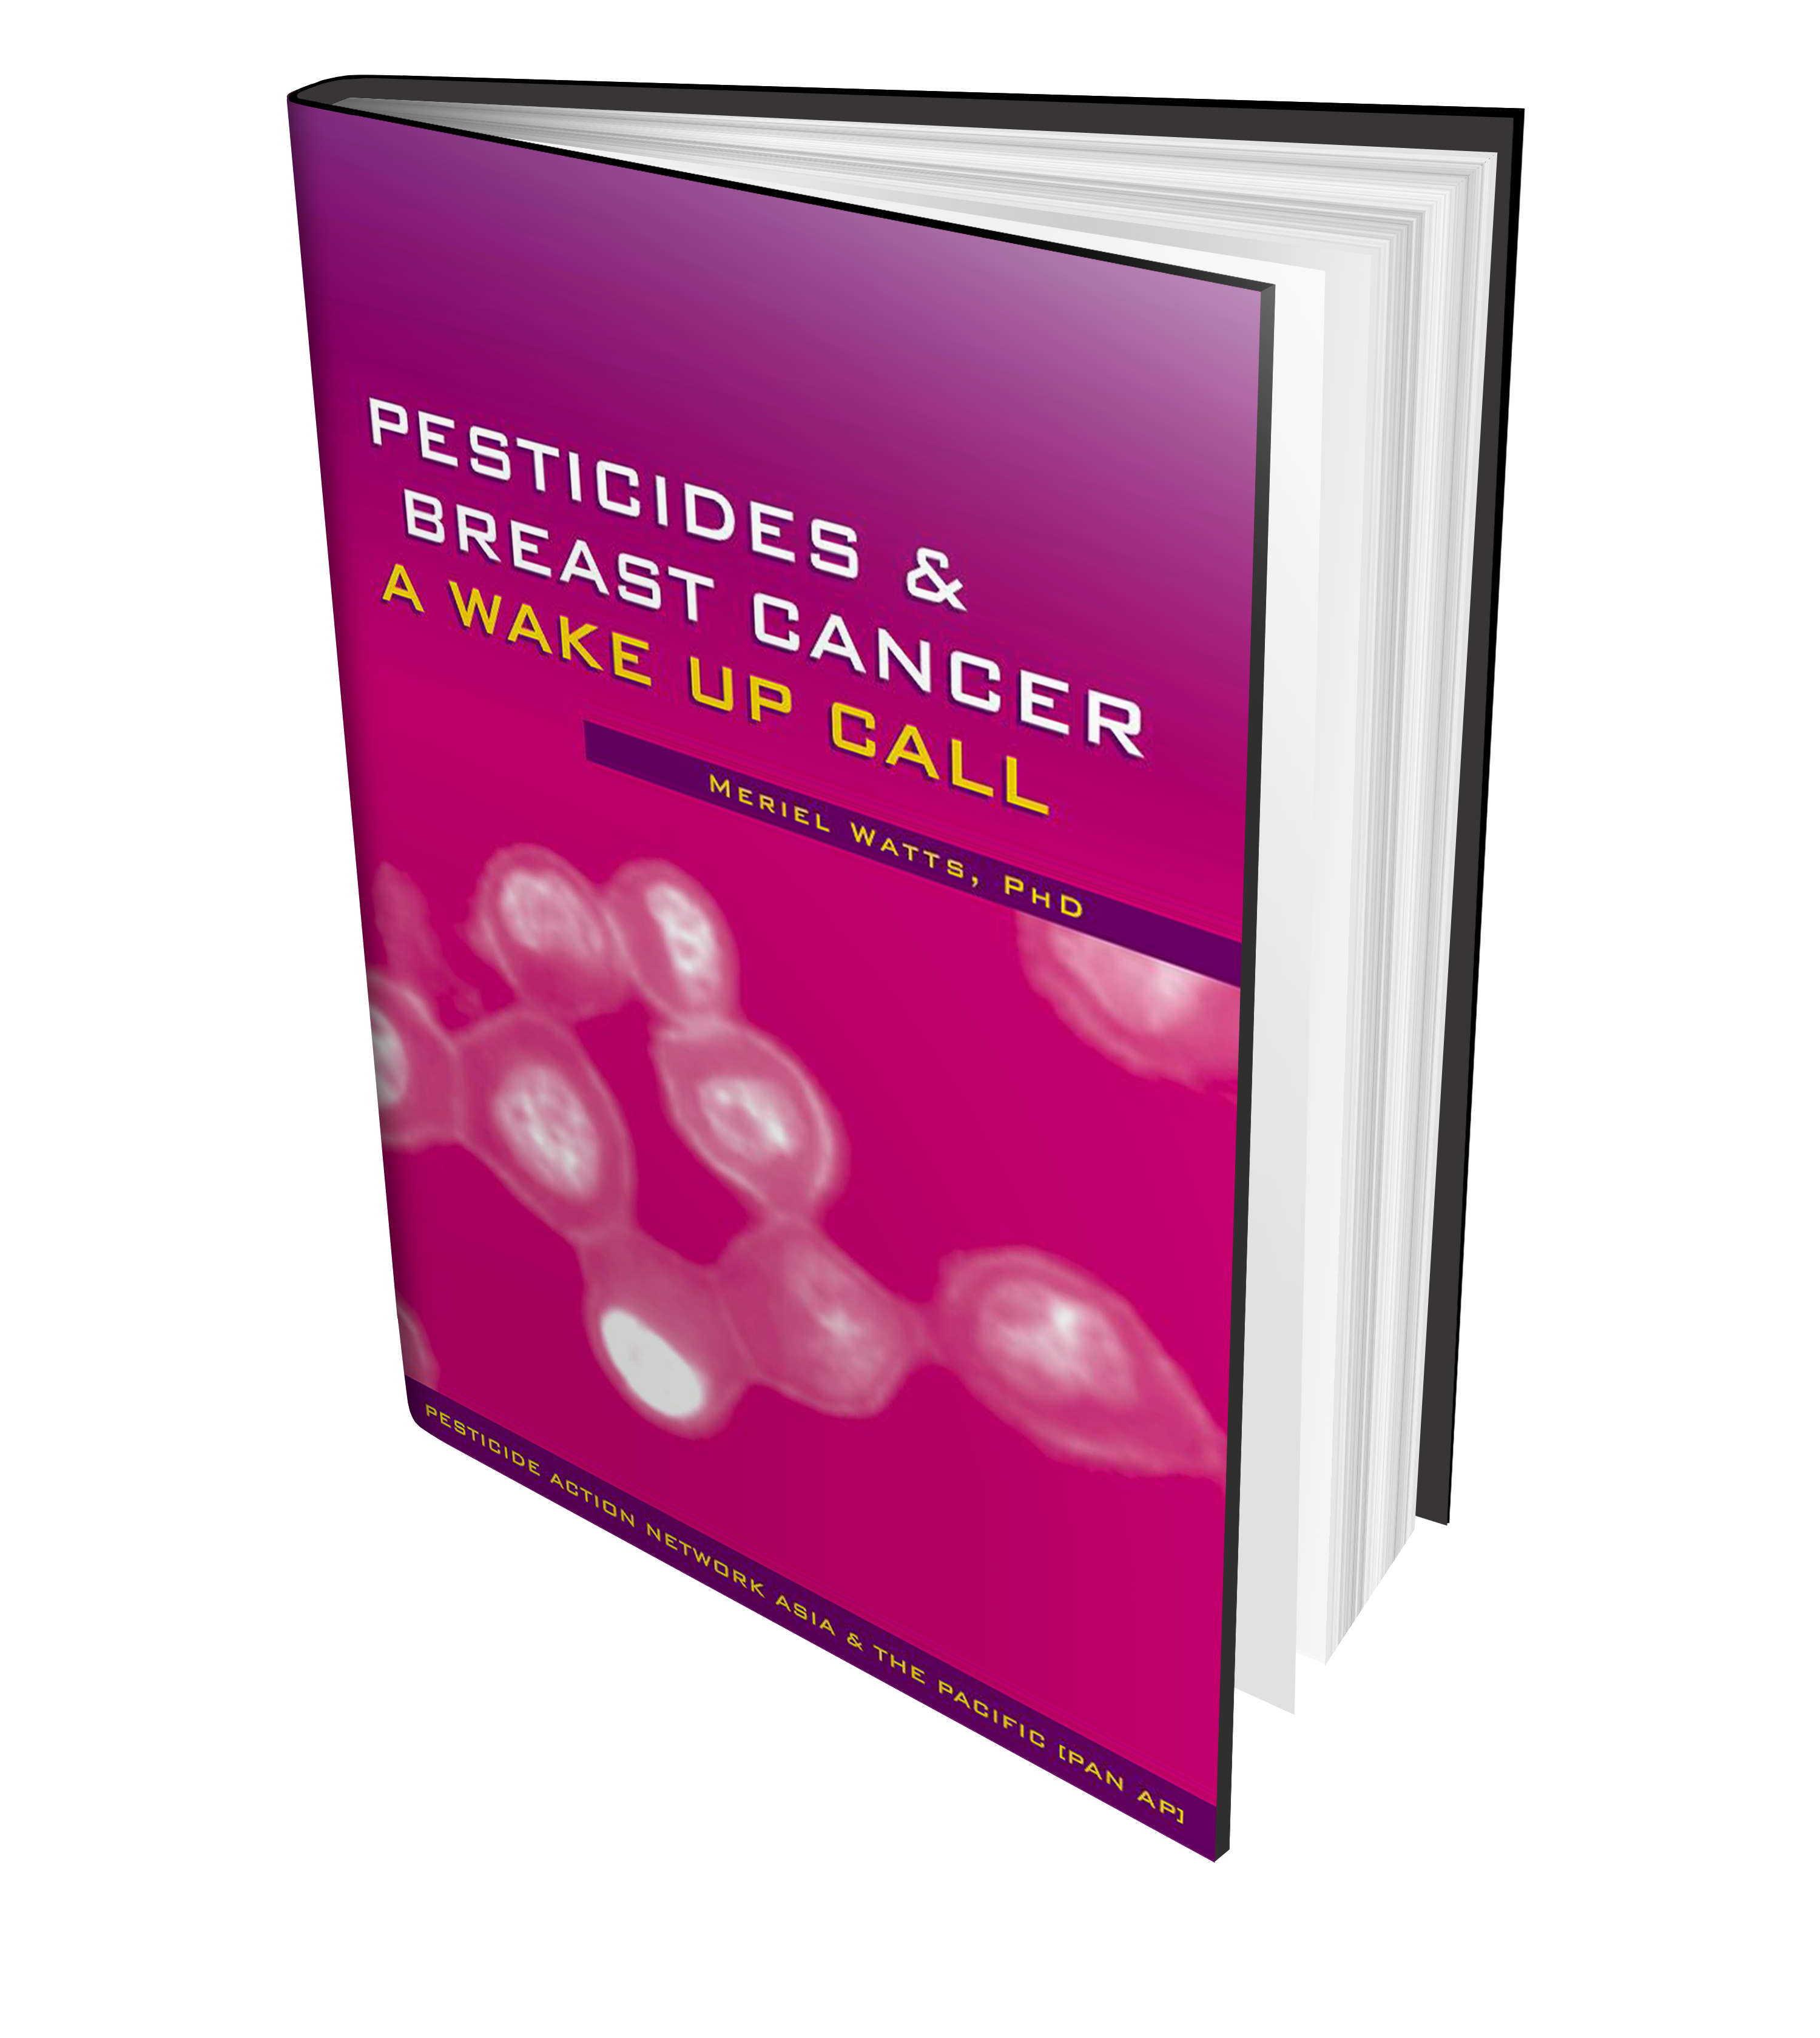 Pesticides and Breast Cancer: A Wake Up Call  Pesticide Action Network ...